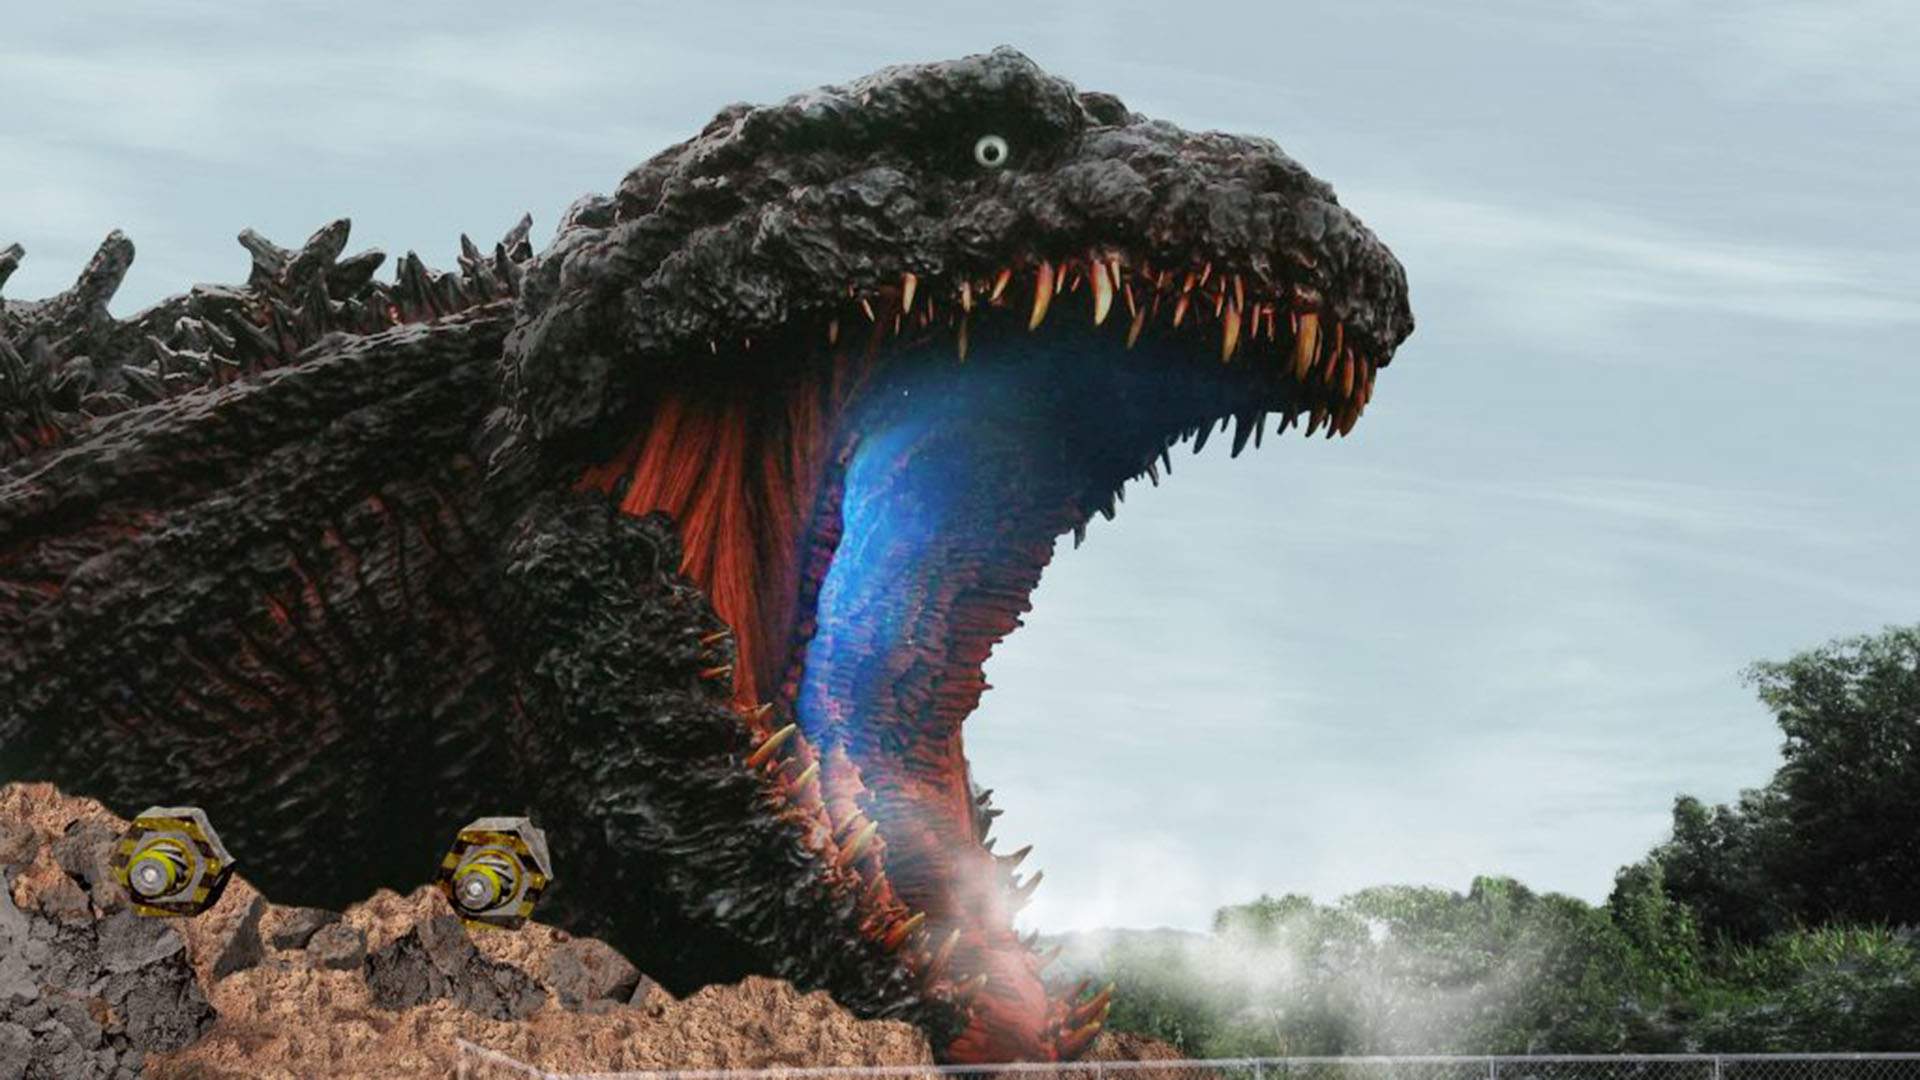 You Ll Soon Be Able To Zoom Into A Life Sized Godzilla Statue Via Zipline Concrete Playground